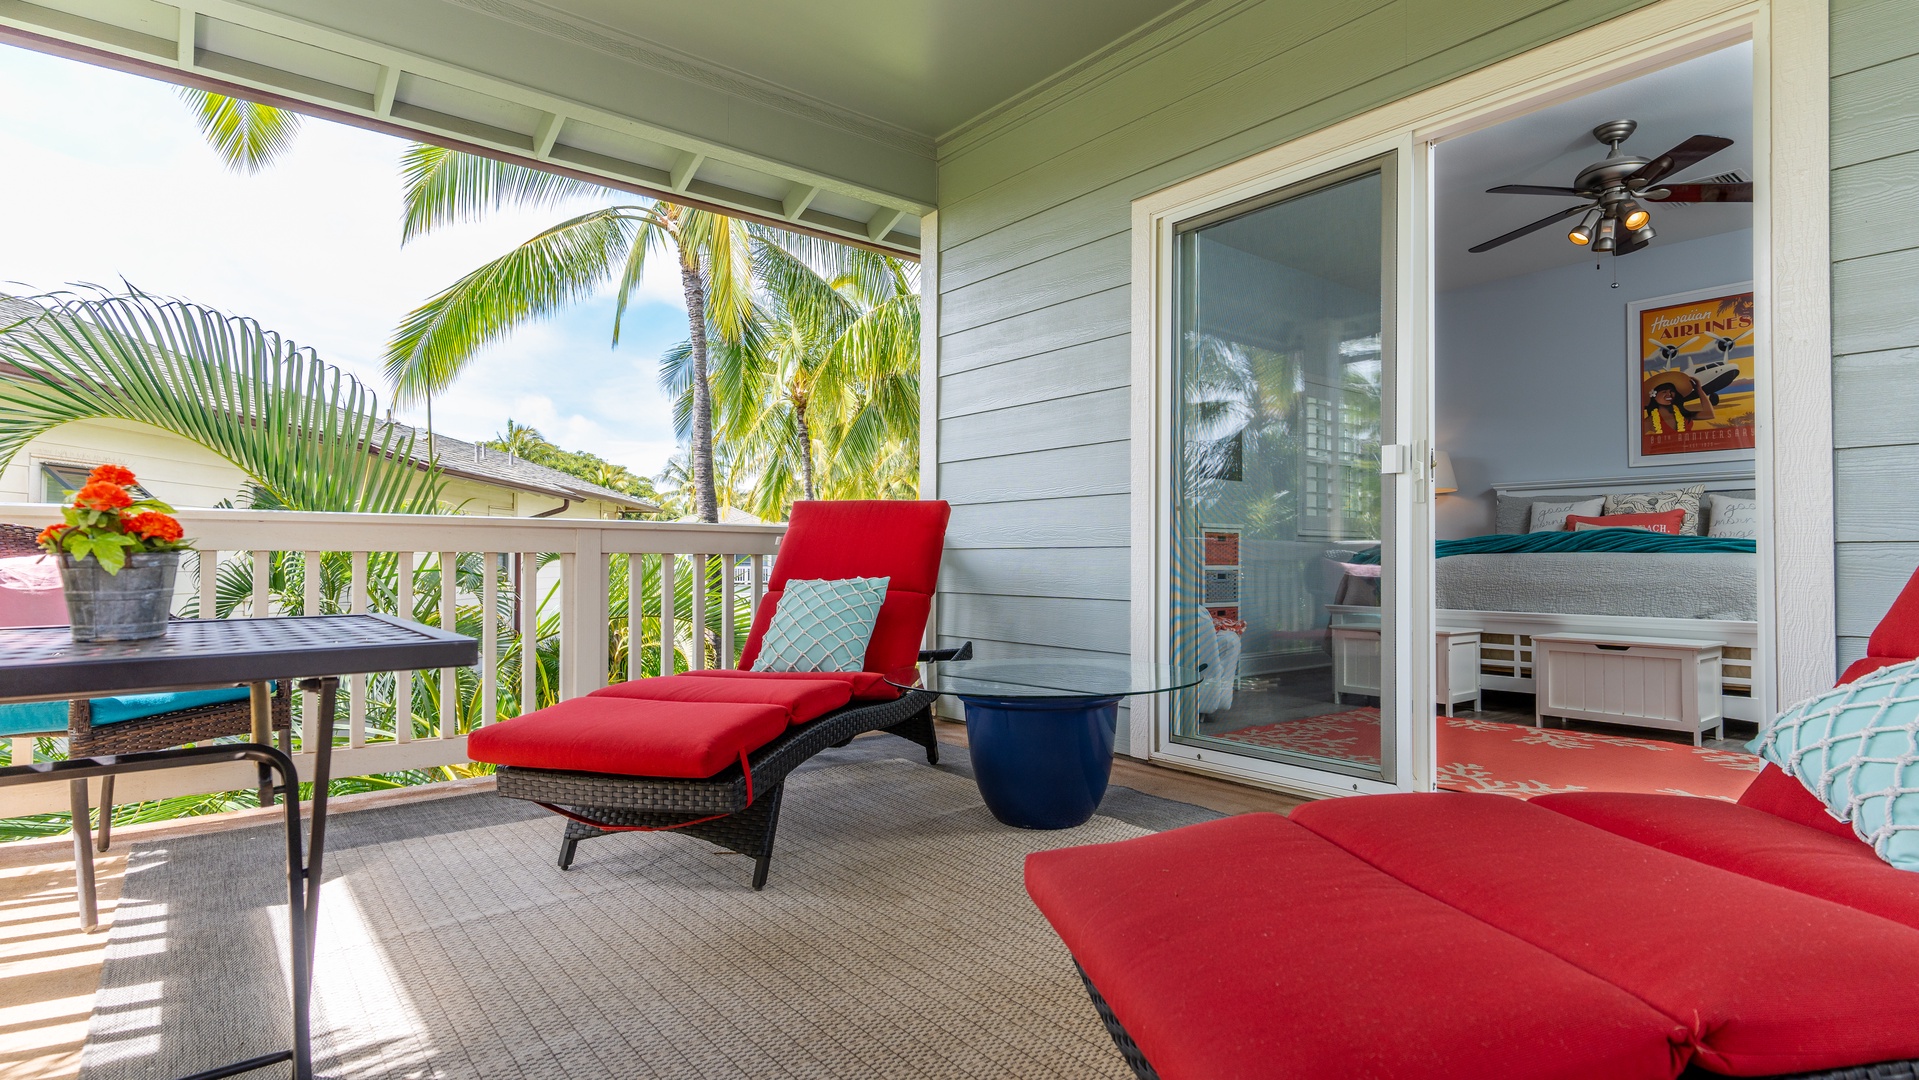 Kapolei Vacation Rentals, Coconut Plantation 1074-4 - Lounge chairs and island breezes.